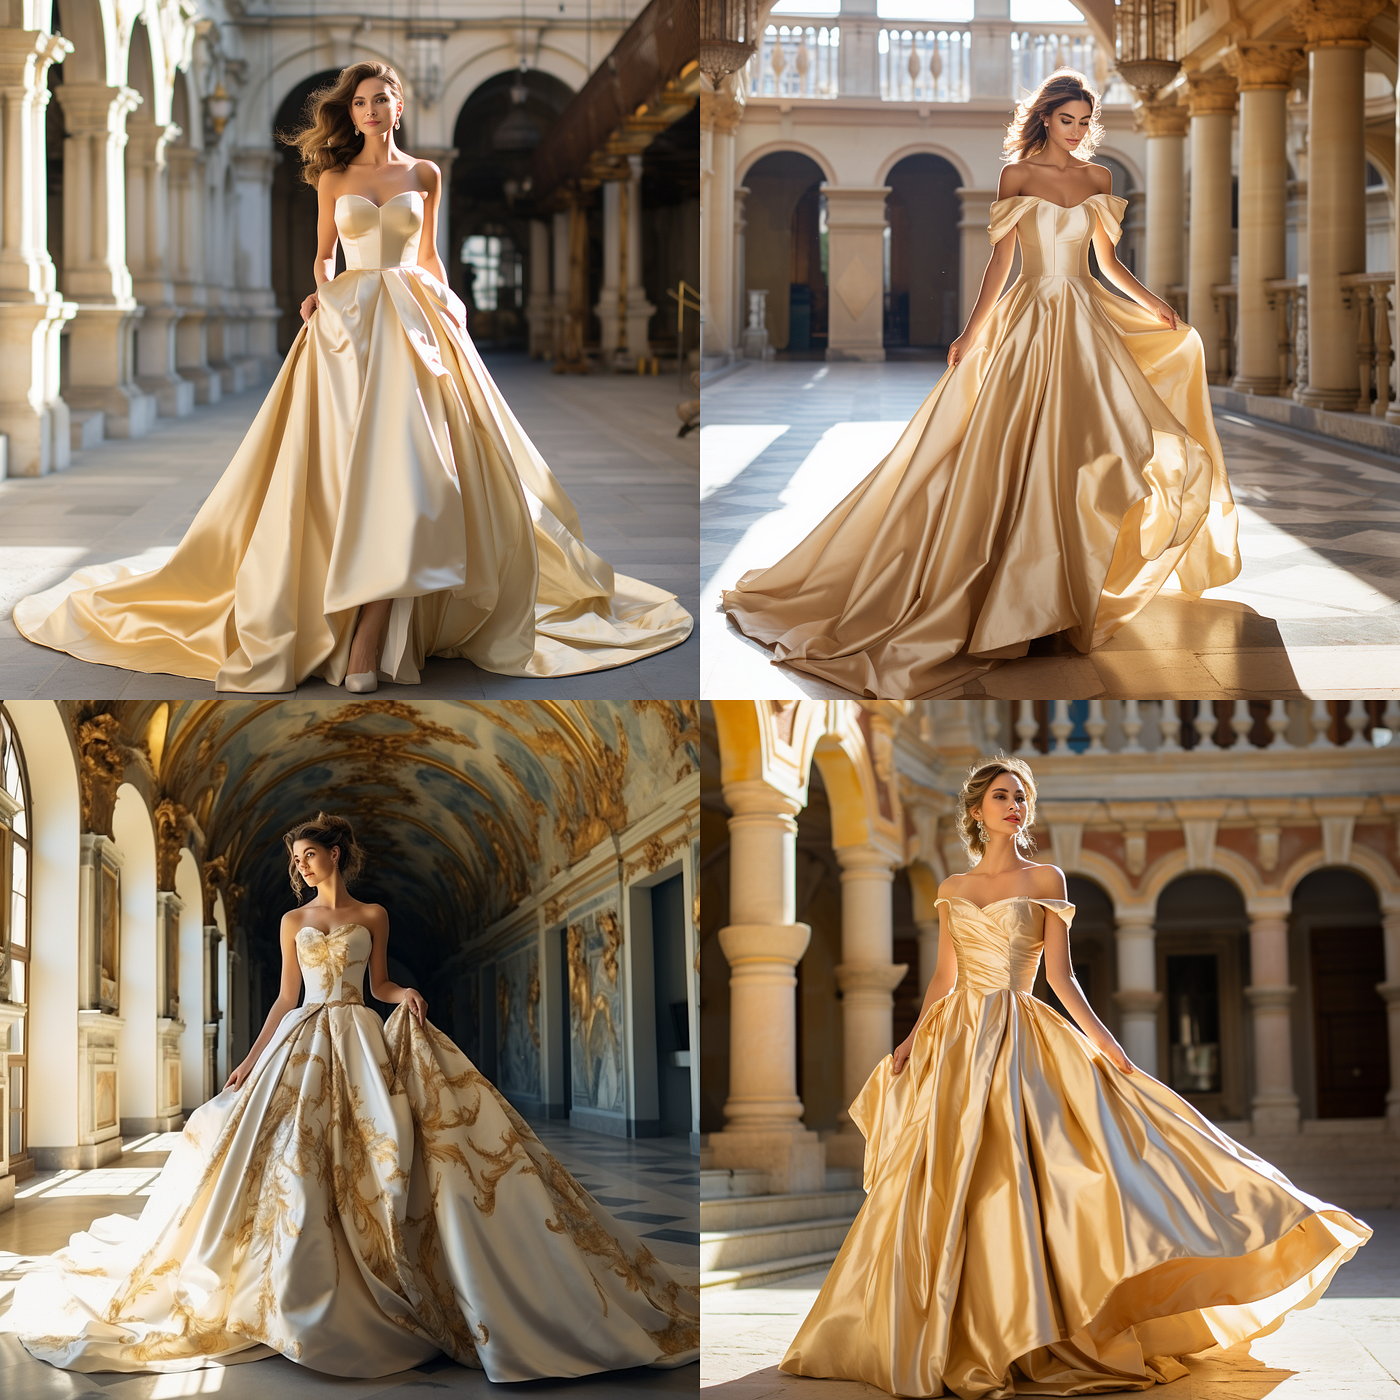 Beautiful Gold Satin Ballgown with Glamorous Accessories” Designed for  Mandy Wilson | by DigitalCoutureCo | Bridal Collection | Medium